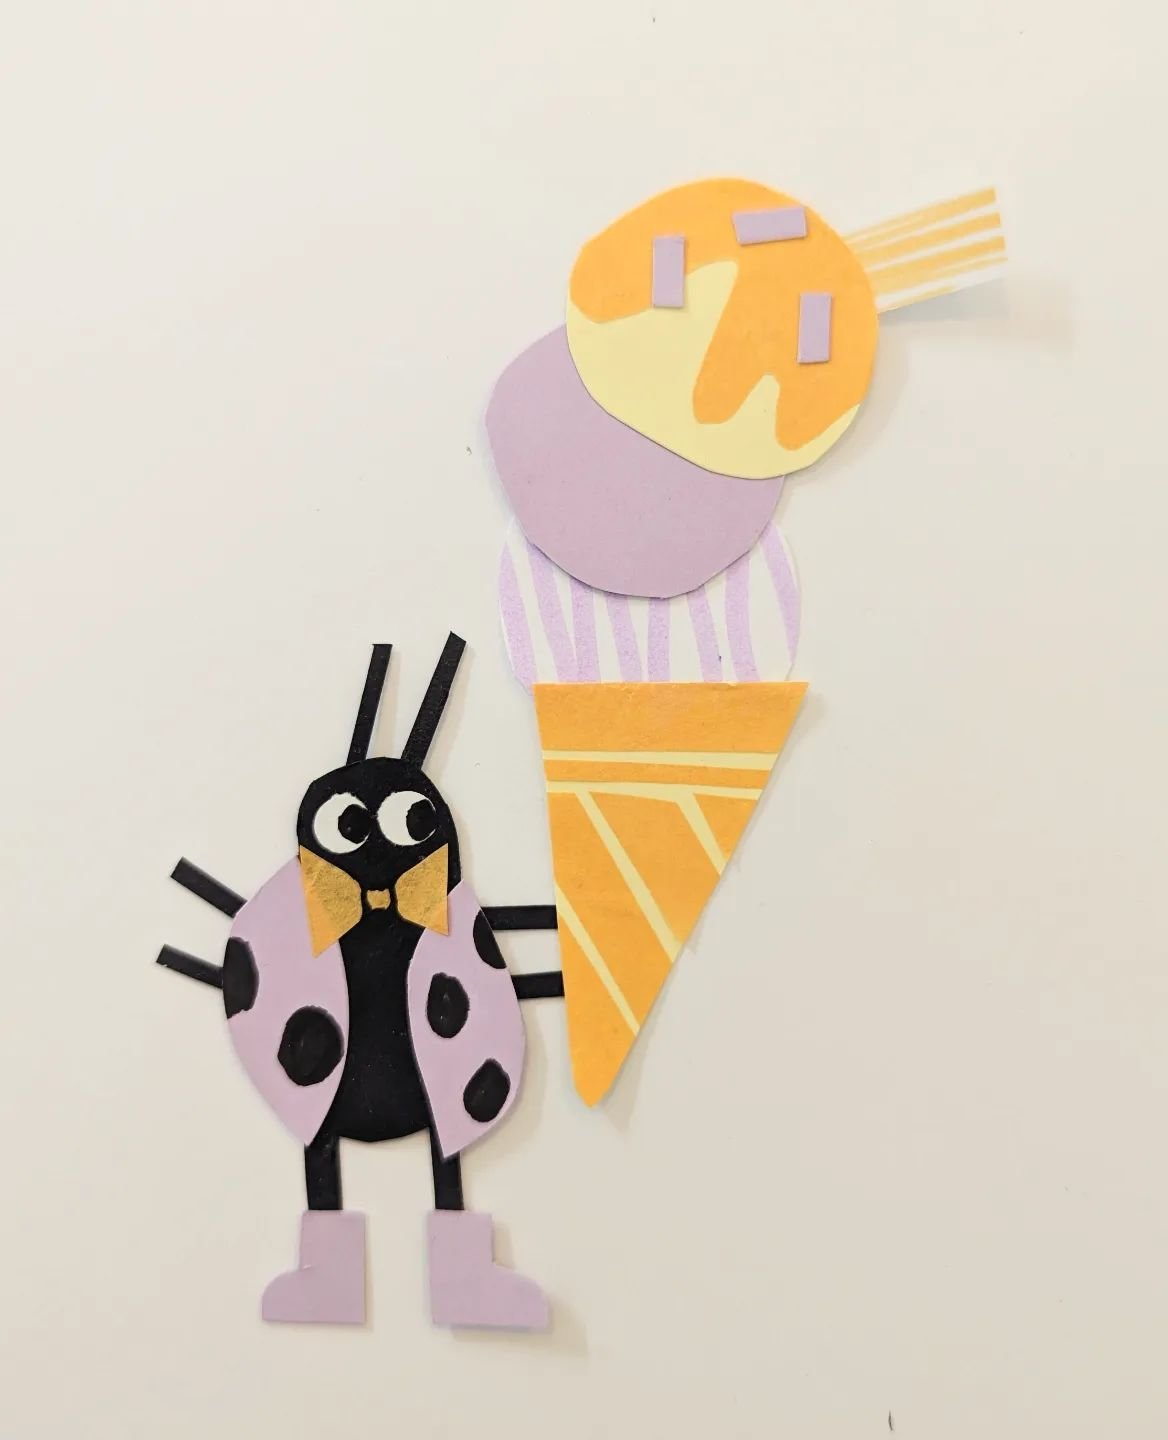 Summer is almost here!

Collage today working on the start of a new summer print 

#illustrationproject #illustratorsoninstagram #collage #ladybirdillustration #cuteillustration #icecreamillustration #surfacepatterndesigner